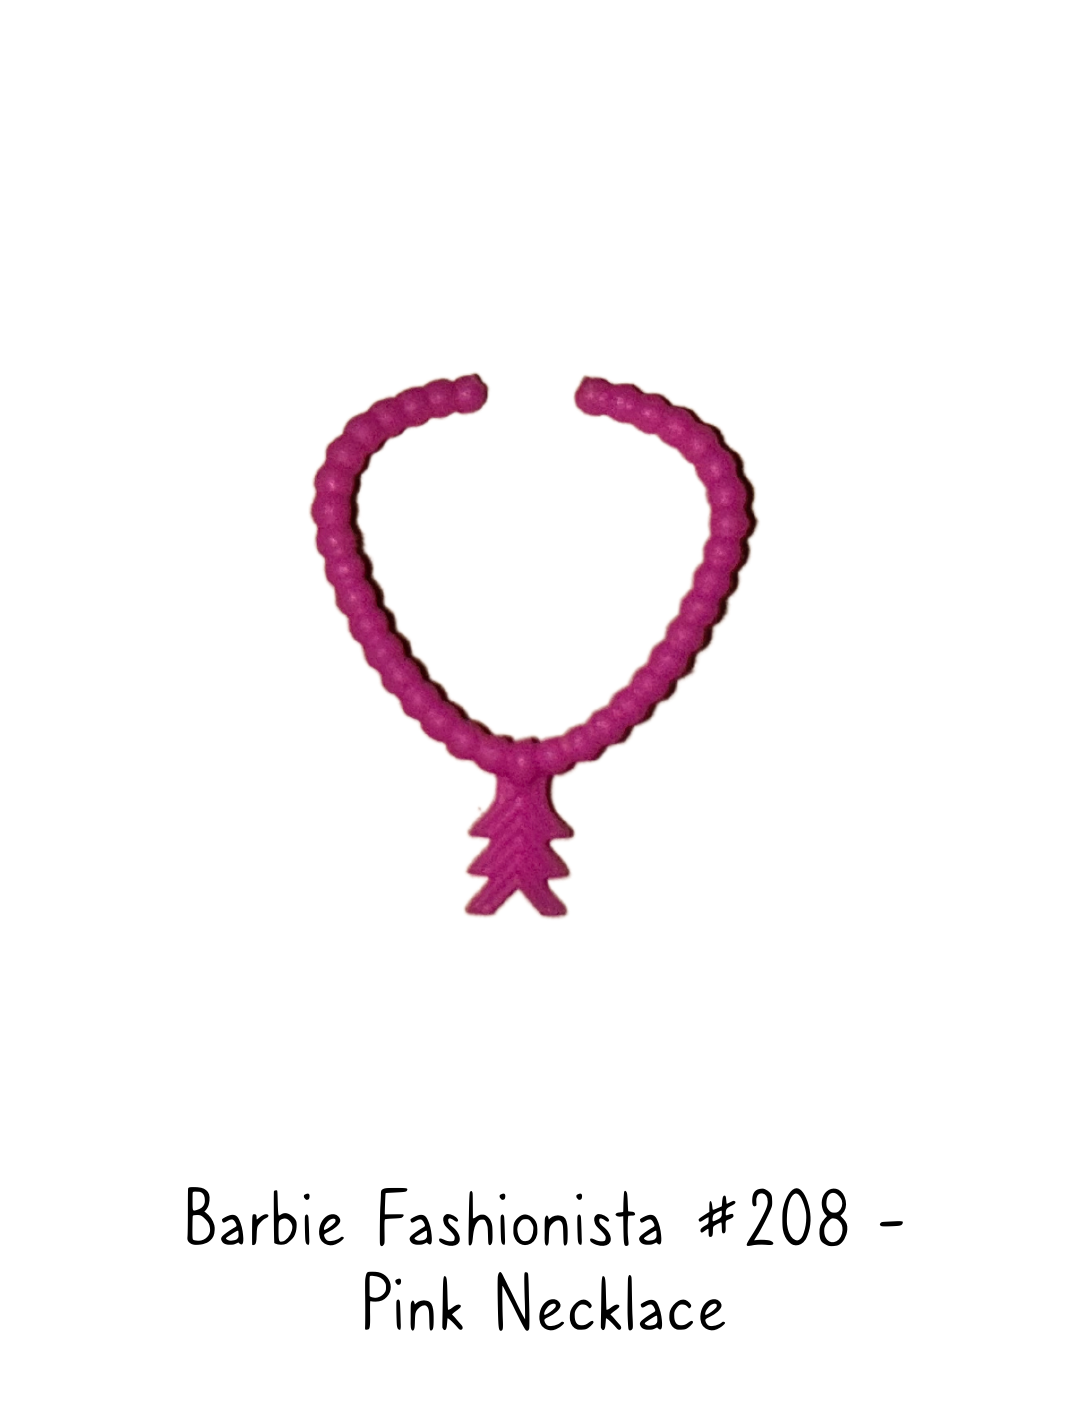 Barbie Fashionista #208 Doll Pink Necklace